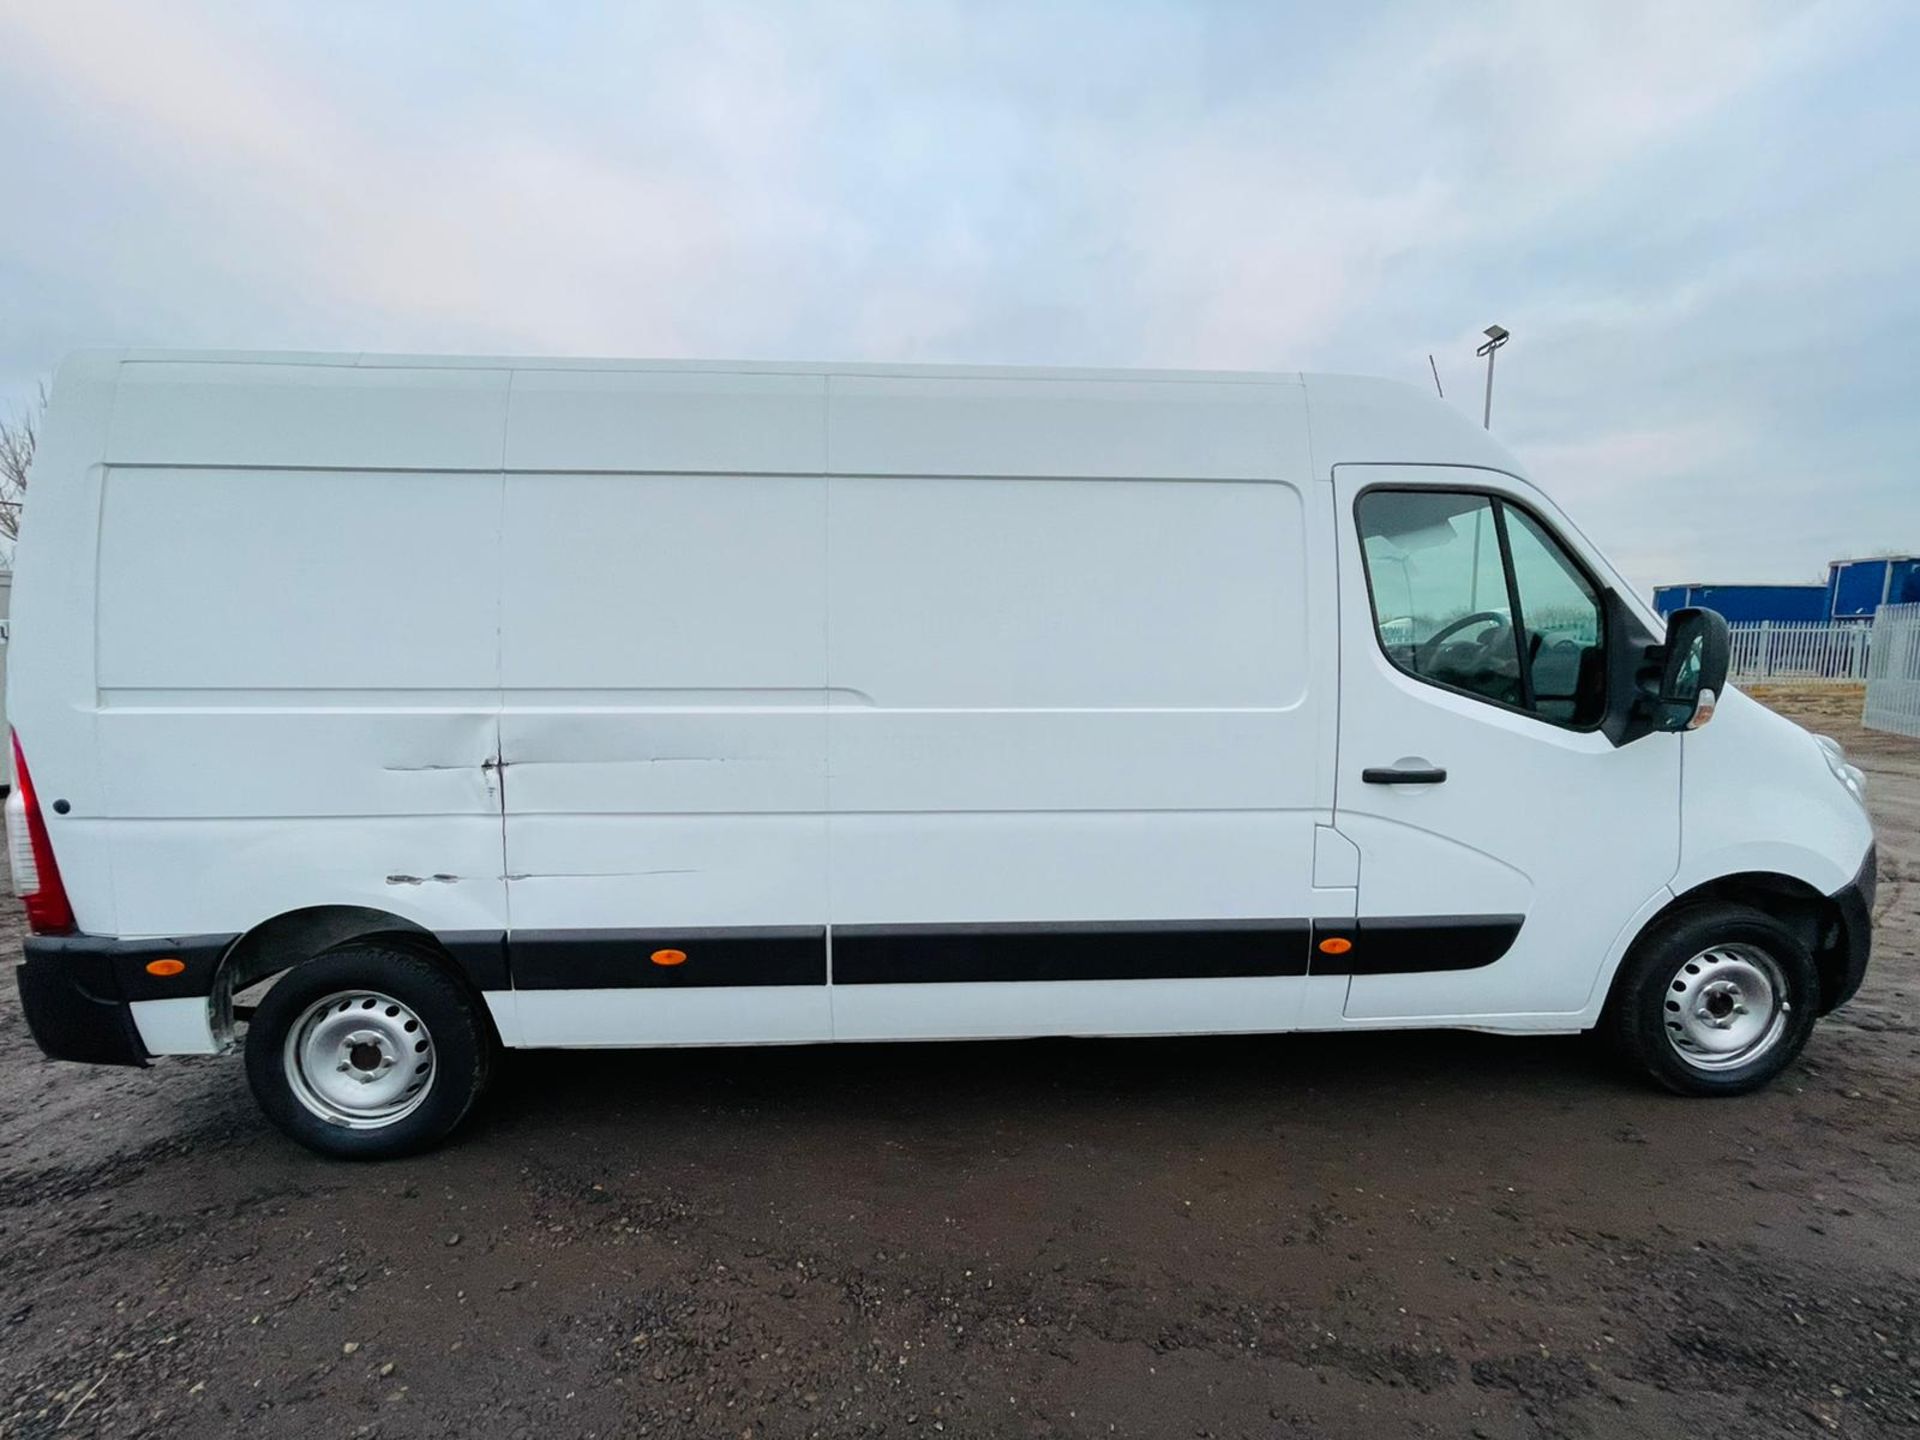 Renault Master 2.3 DCI 110 Business LM35 L3 H2 2016 '16 reg' Fridge/Freezer - Fully Insulated - Image 10 of 23